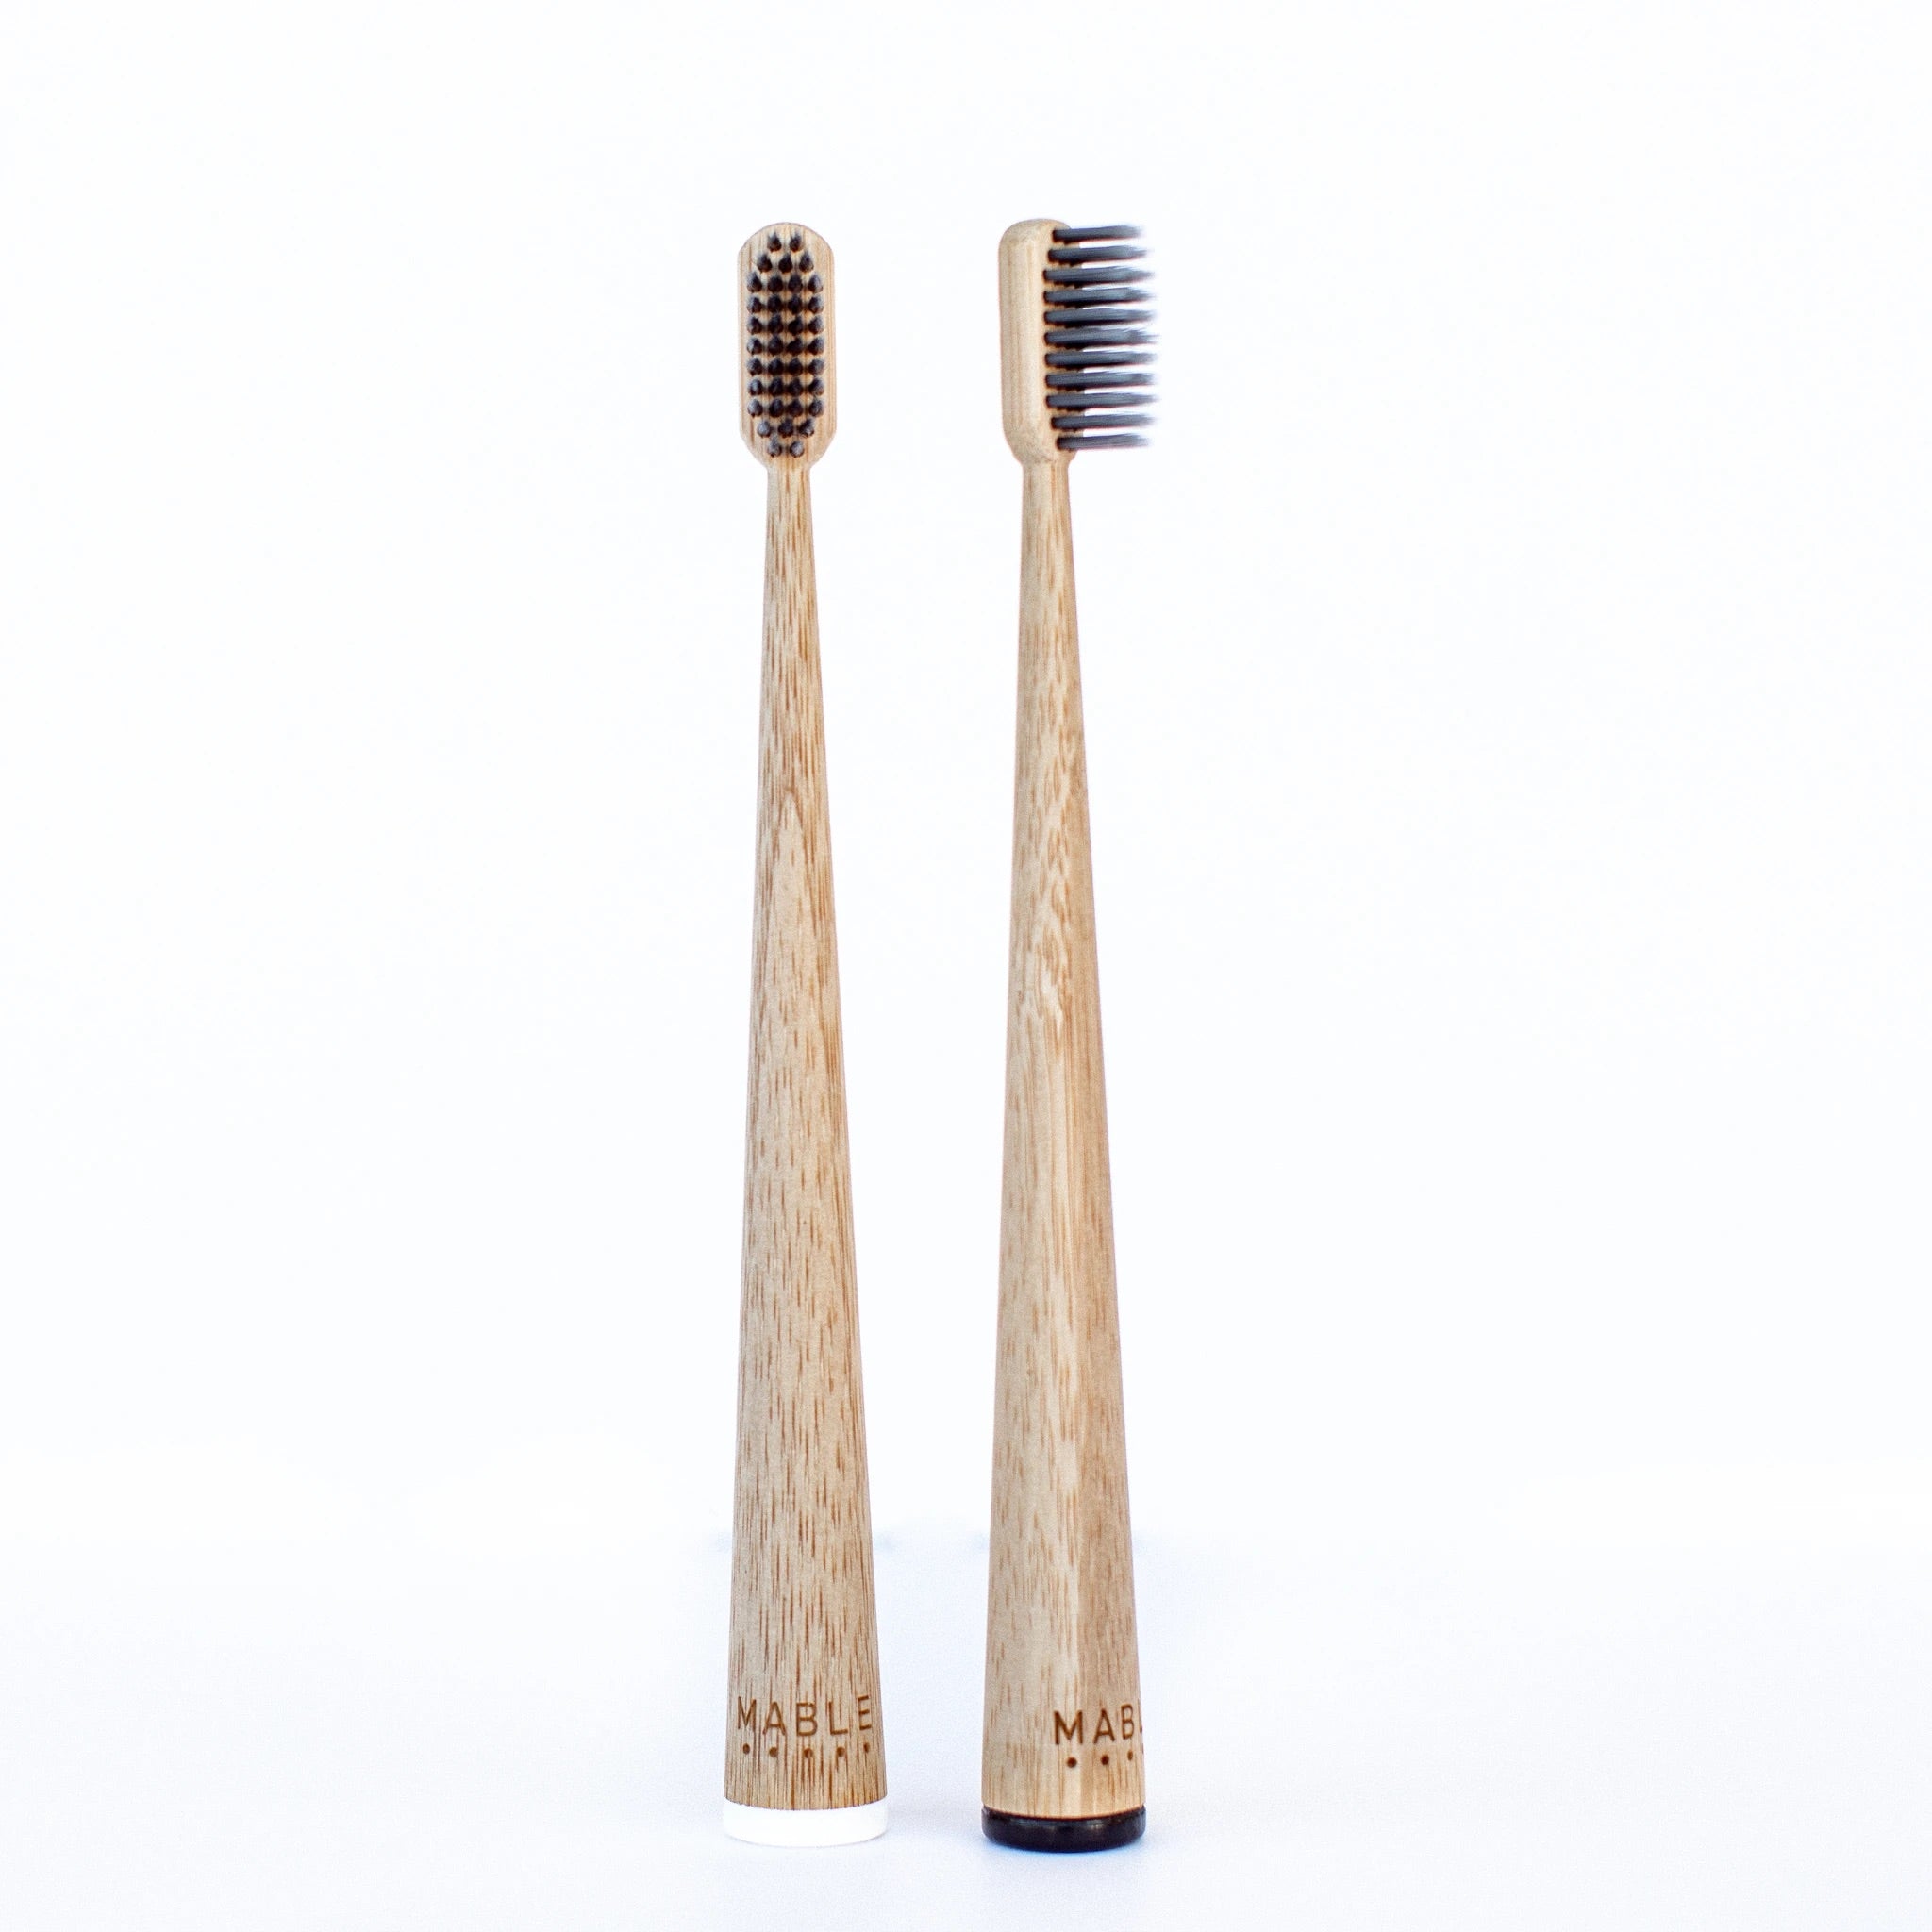 Mable Bamboo Toothbrush Charcoal (2-Pack)